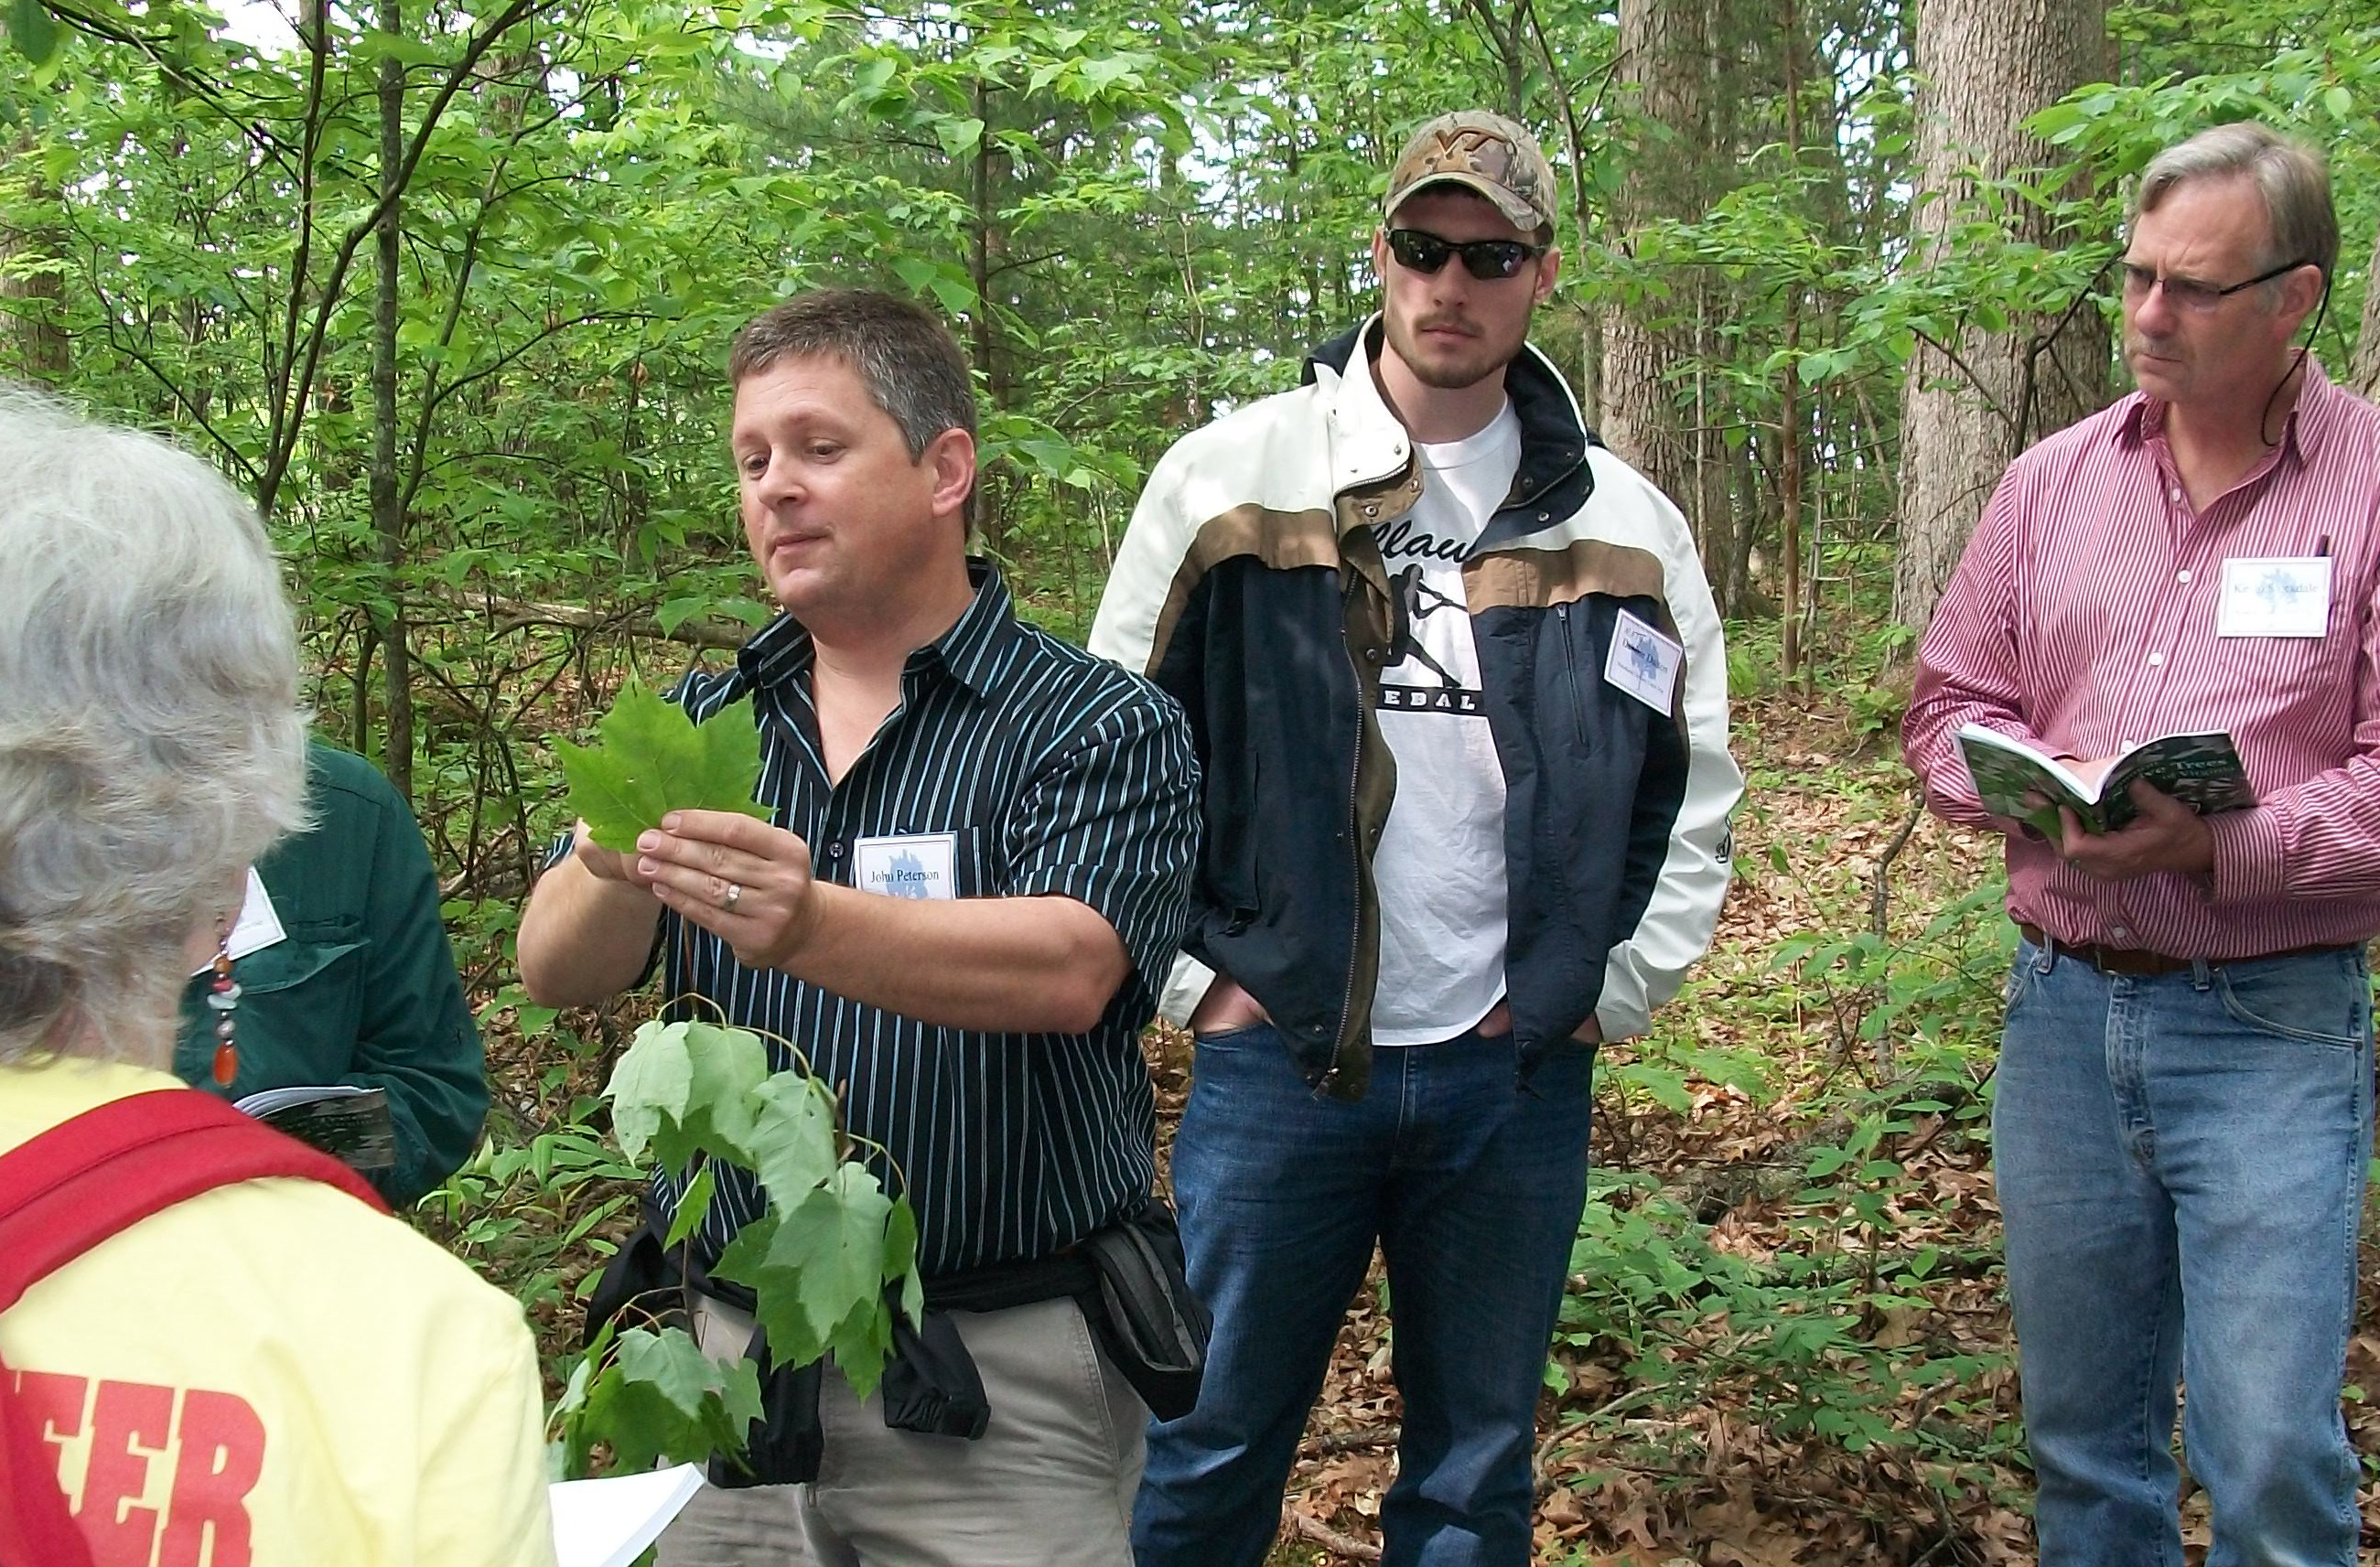 A group of people standing in a wooded setting; one is pointing a leaf in his hand.